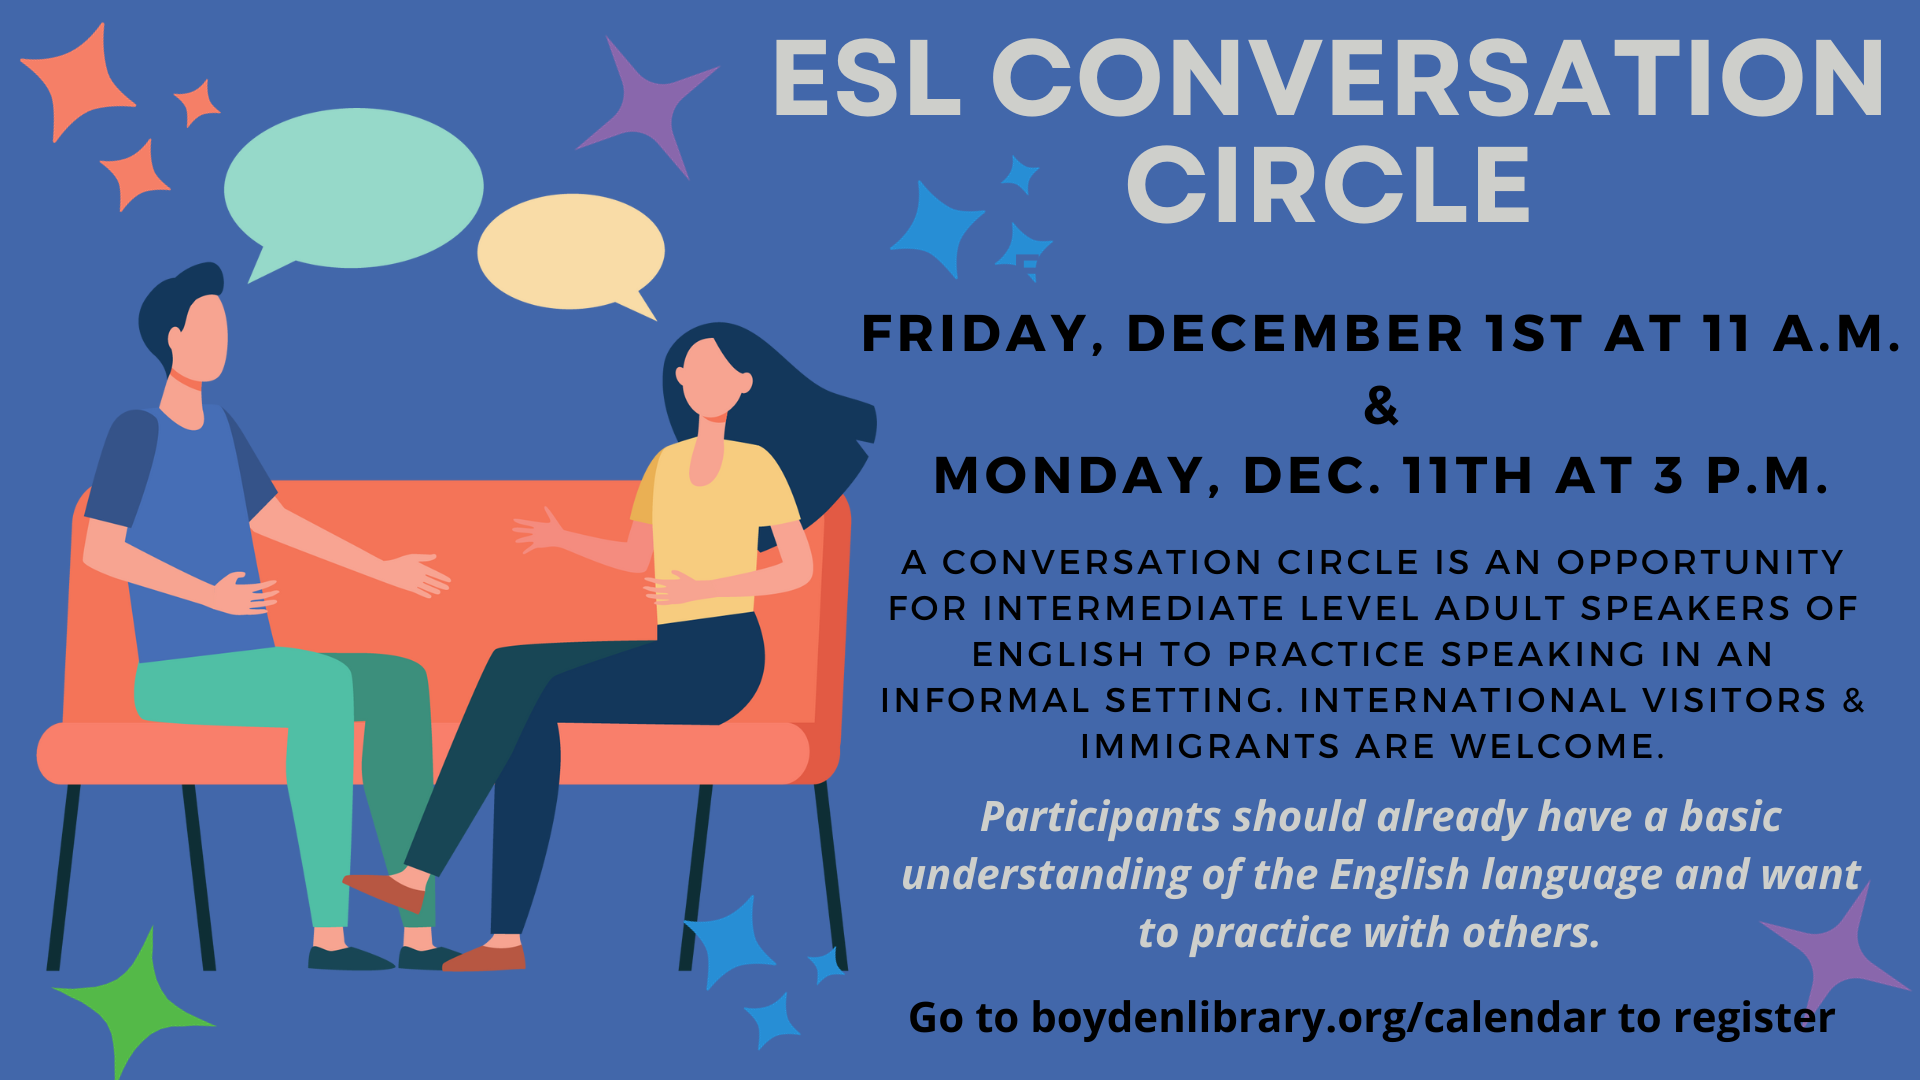 Conversation Circle for intermediate level adult speakers of English